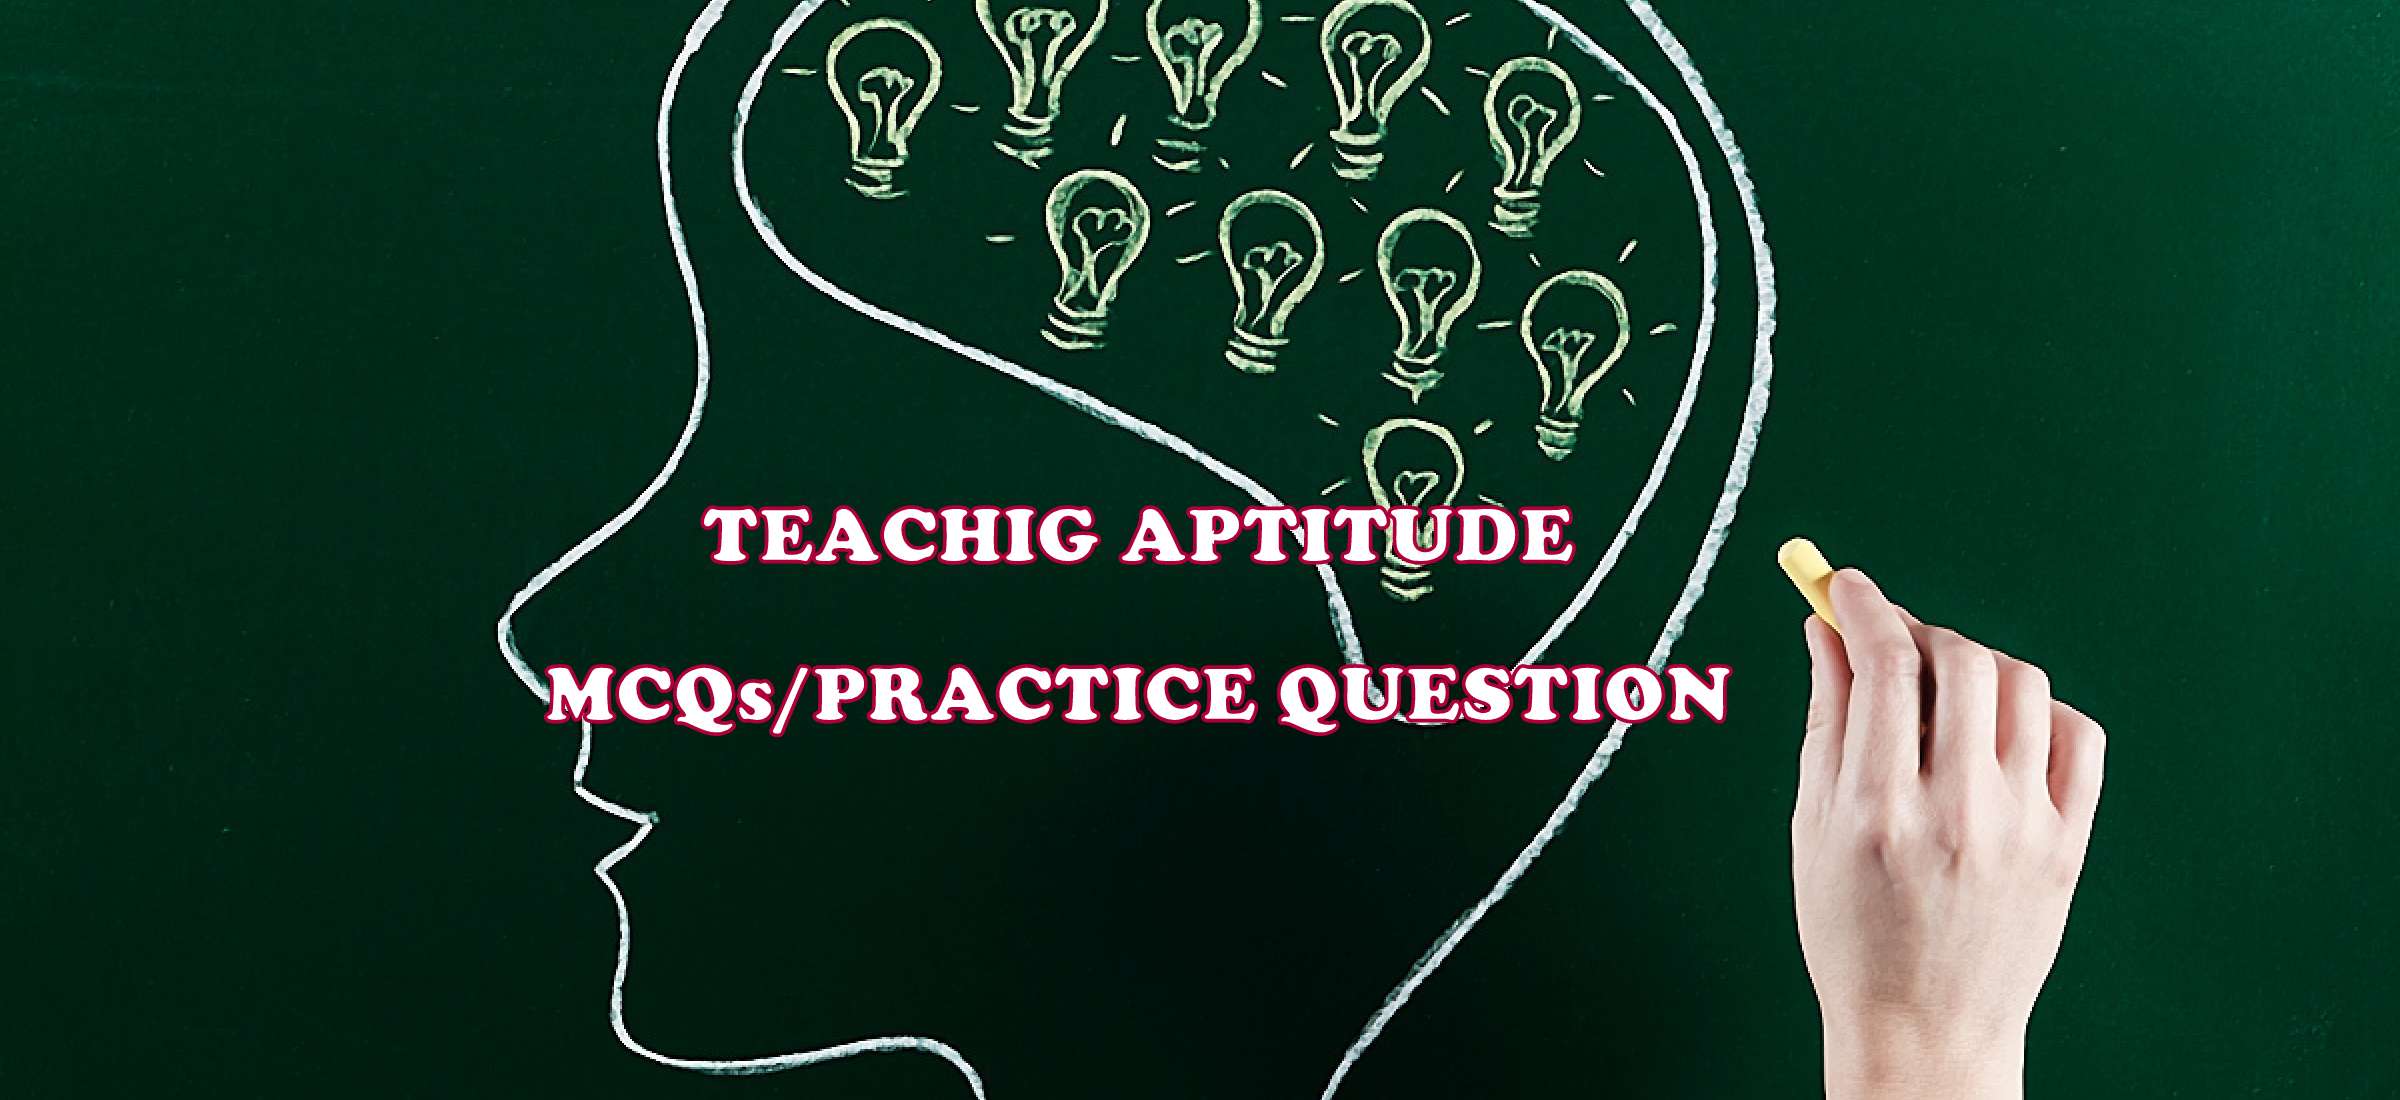 teaching-aptitude-questions-teaching-aptitude-mcqs-practice-questions-simplynotes